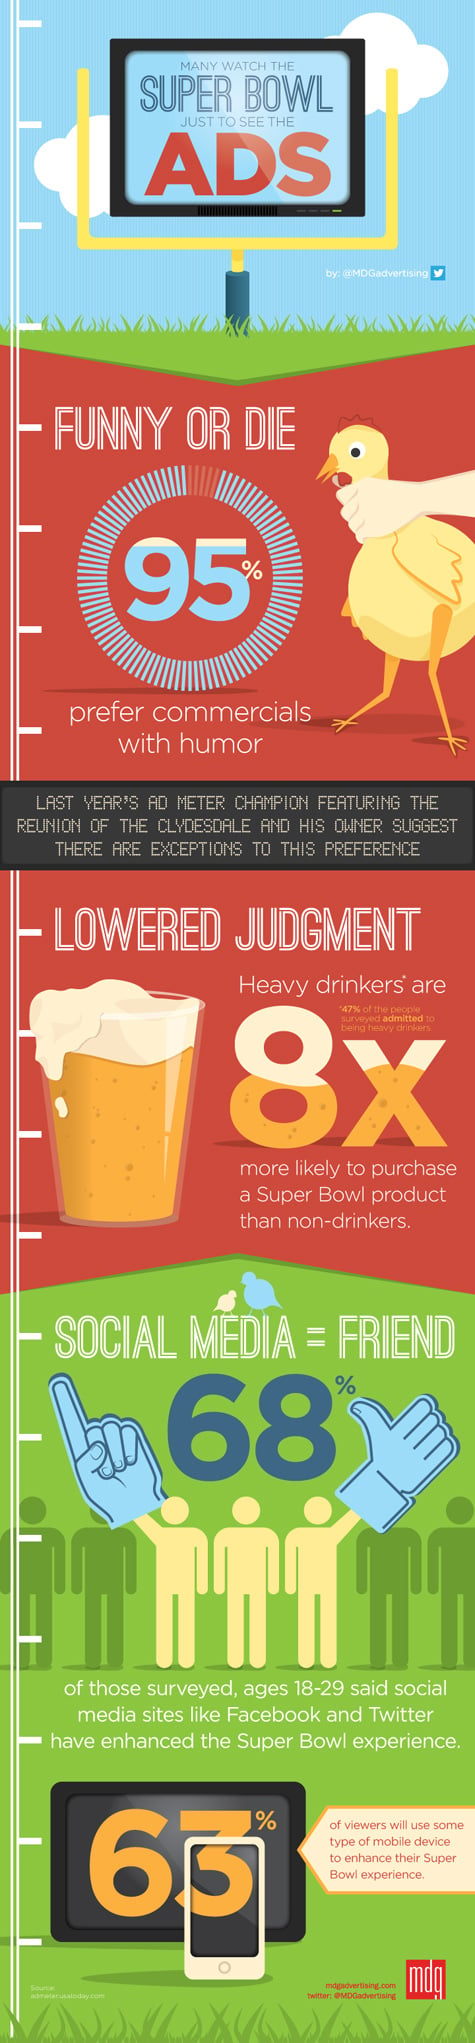 superbowl ads infographic 475